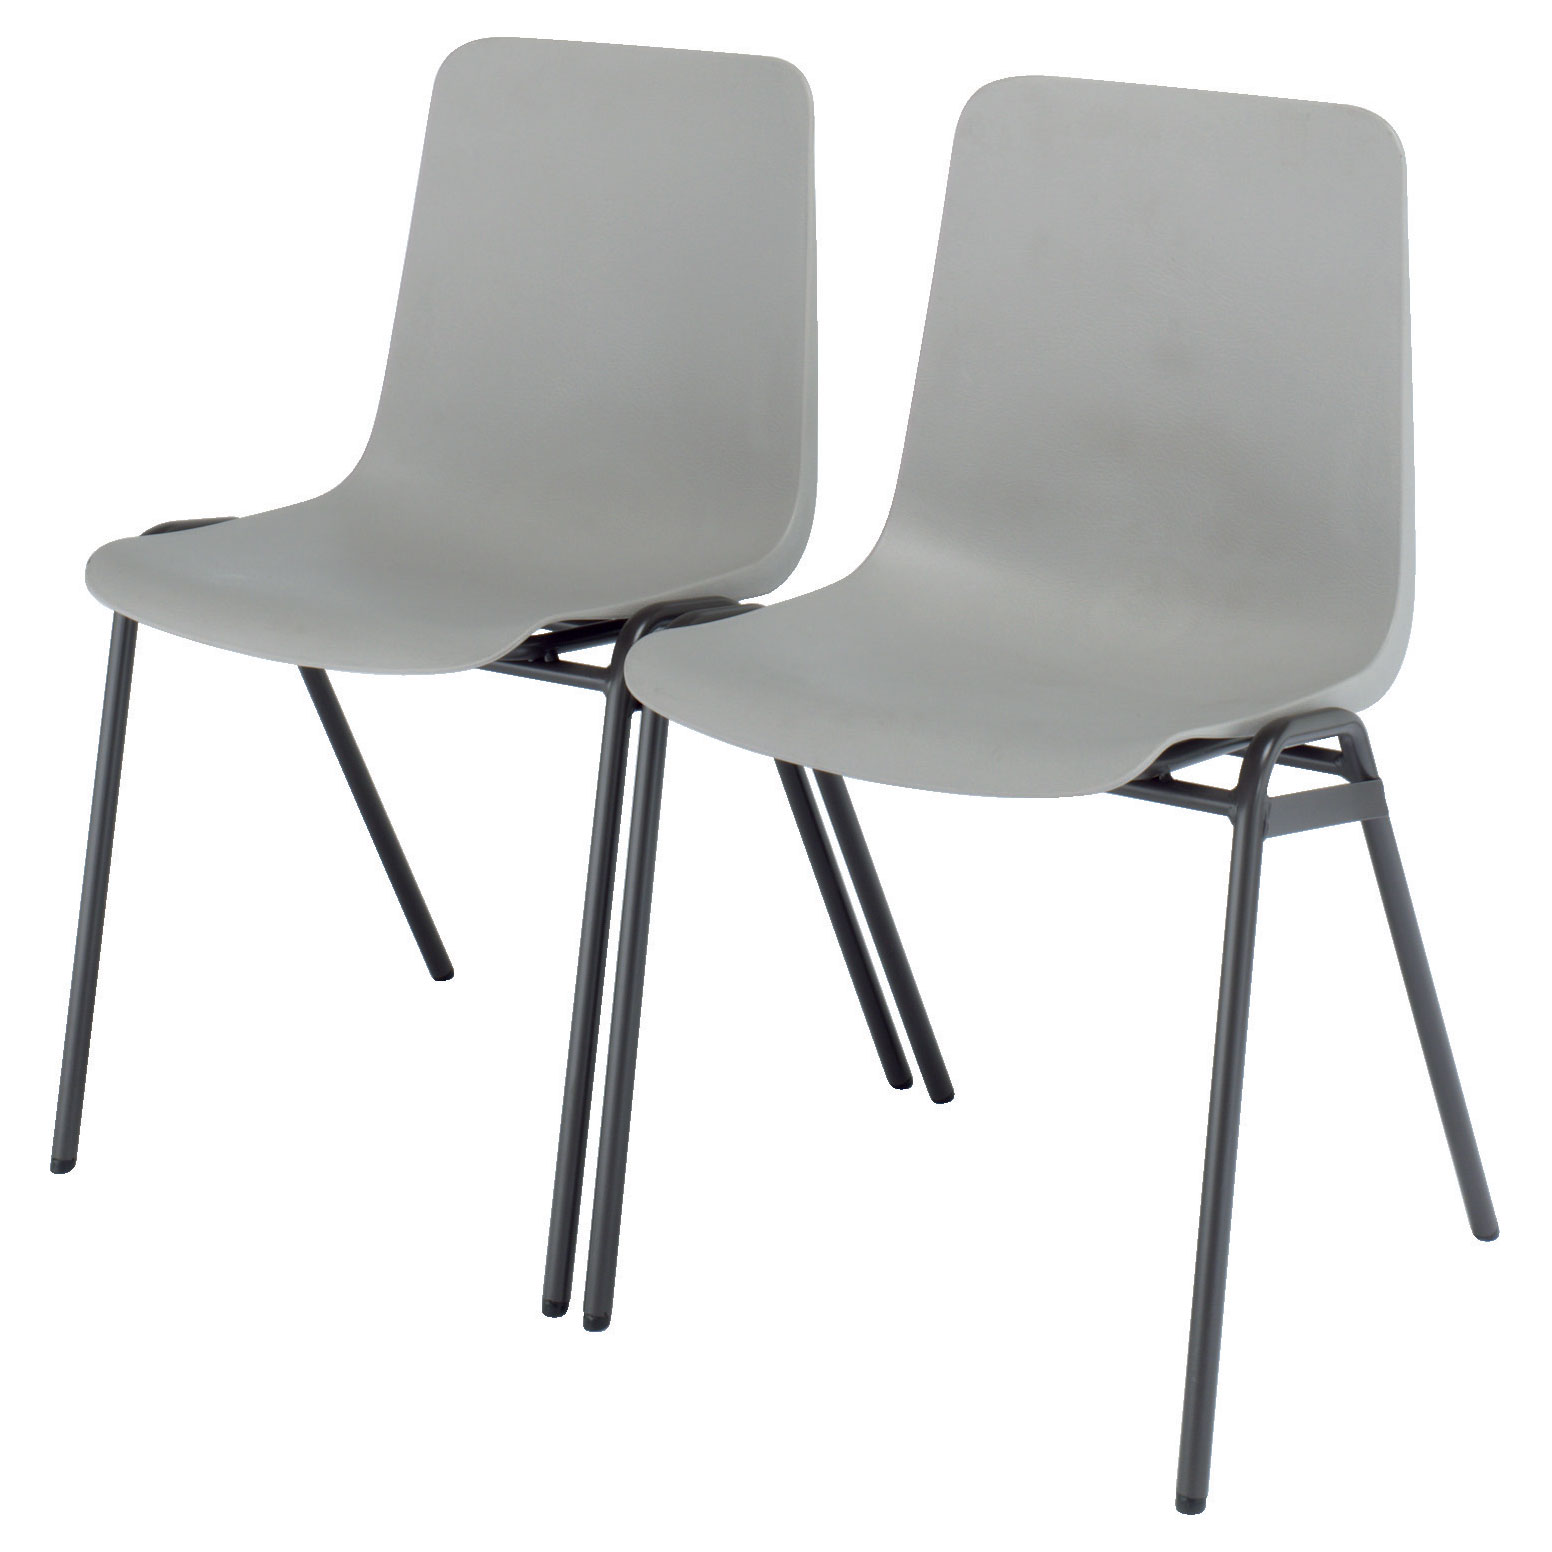 Remploy MX70 Classic School Hall Linking Chair